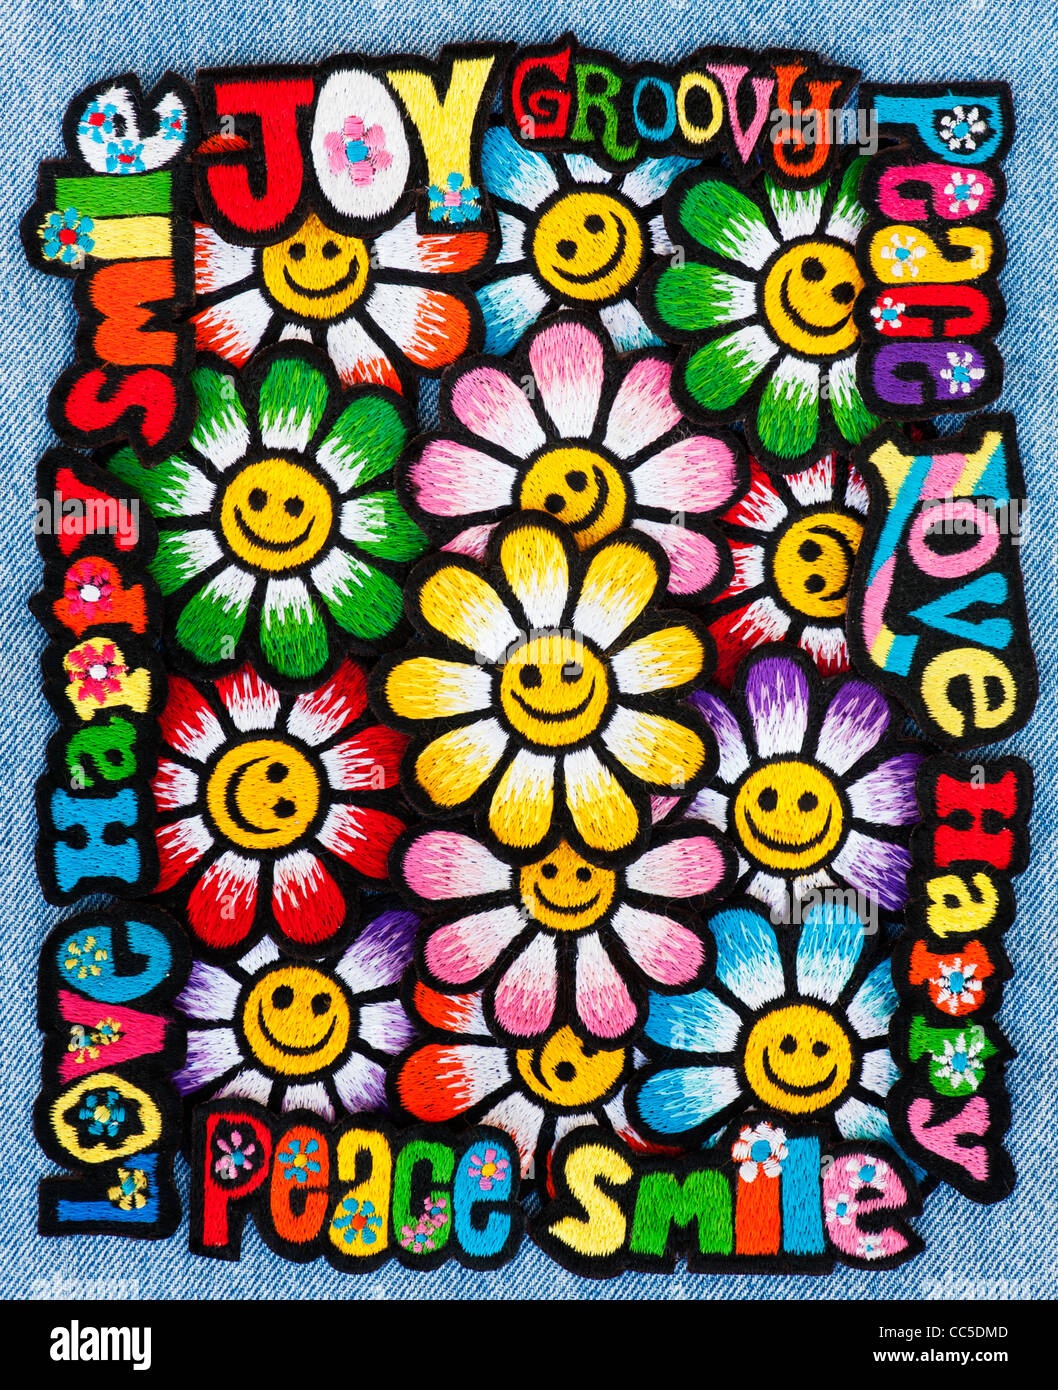 Embroidery iron on patches of Multicoloured Love, Peace, Happy words with smiley face flowers on a denim jean background Stock Photo